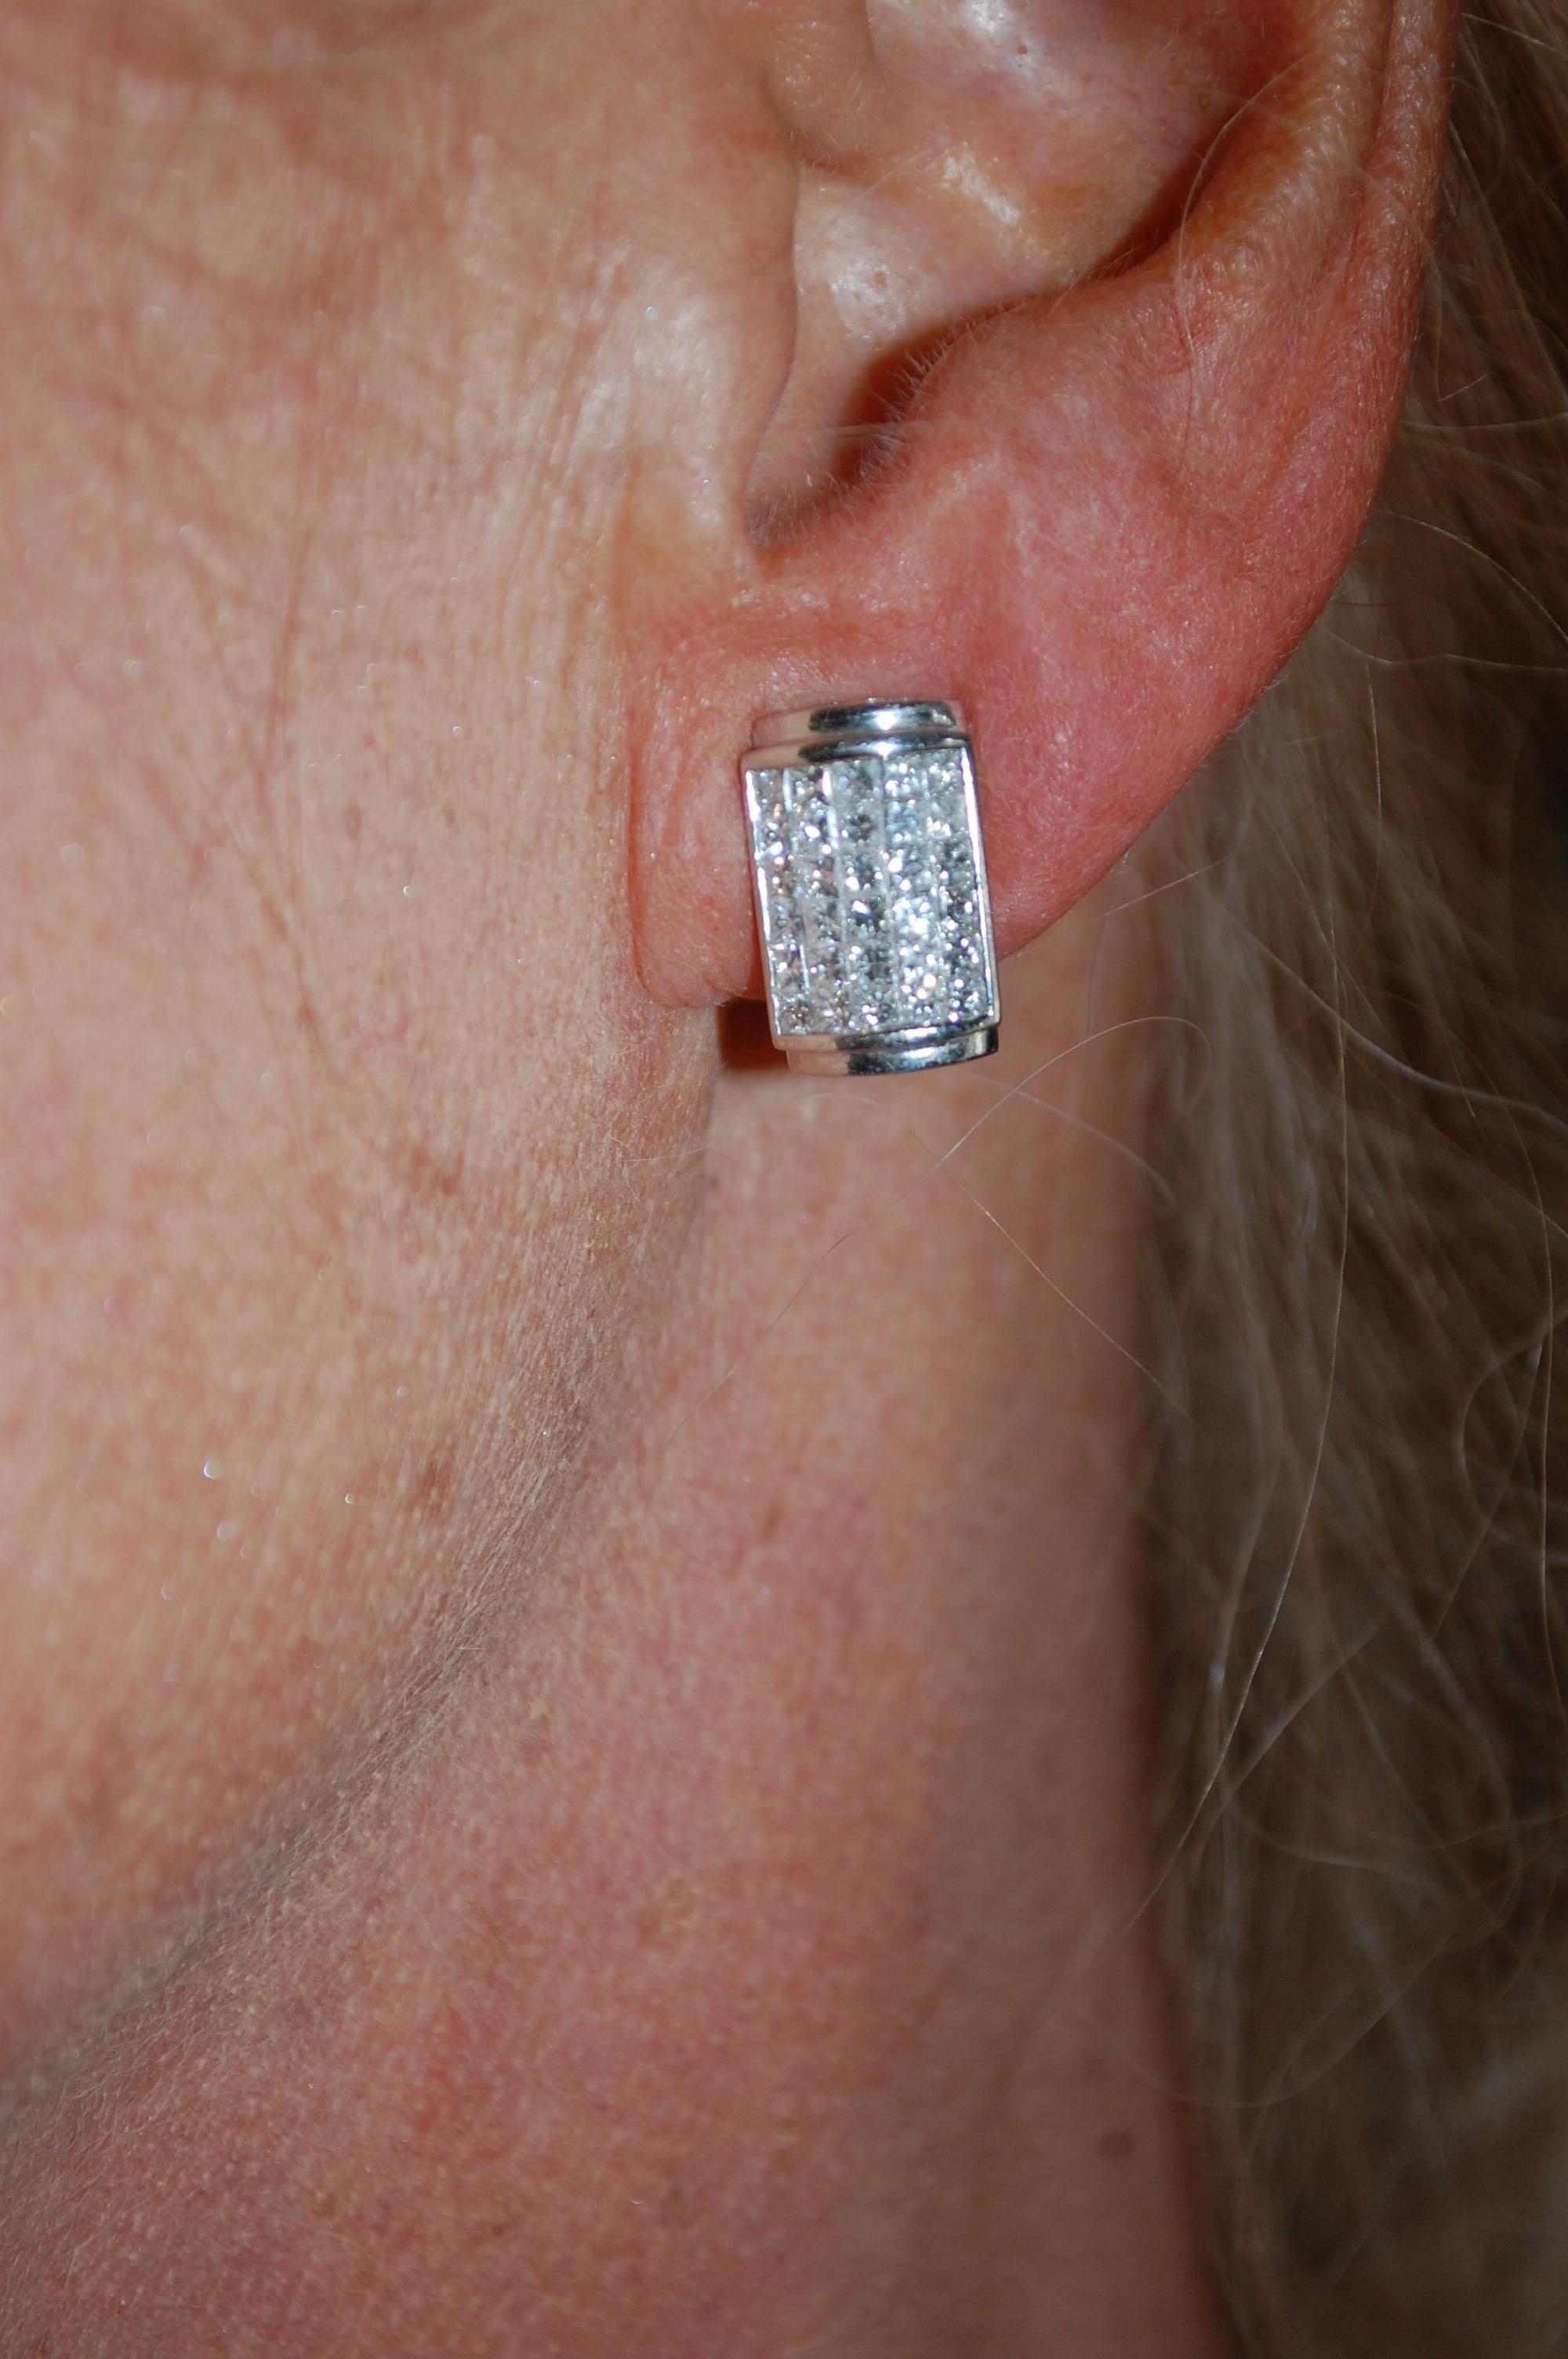 Estate 18k white gold marked 18kg, and 750 M.D.J  Maison De Jewels.  A lovely pair of pave clip on earrings set in 18k white gold. This delightful earrings are invisibly set with each exactly 30 princess cut diamonds which have about 1.5 carat total